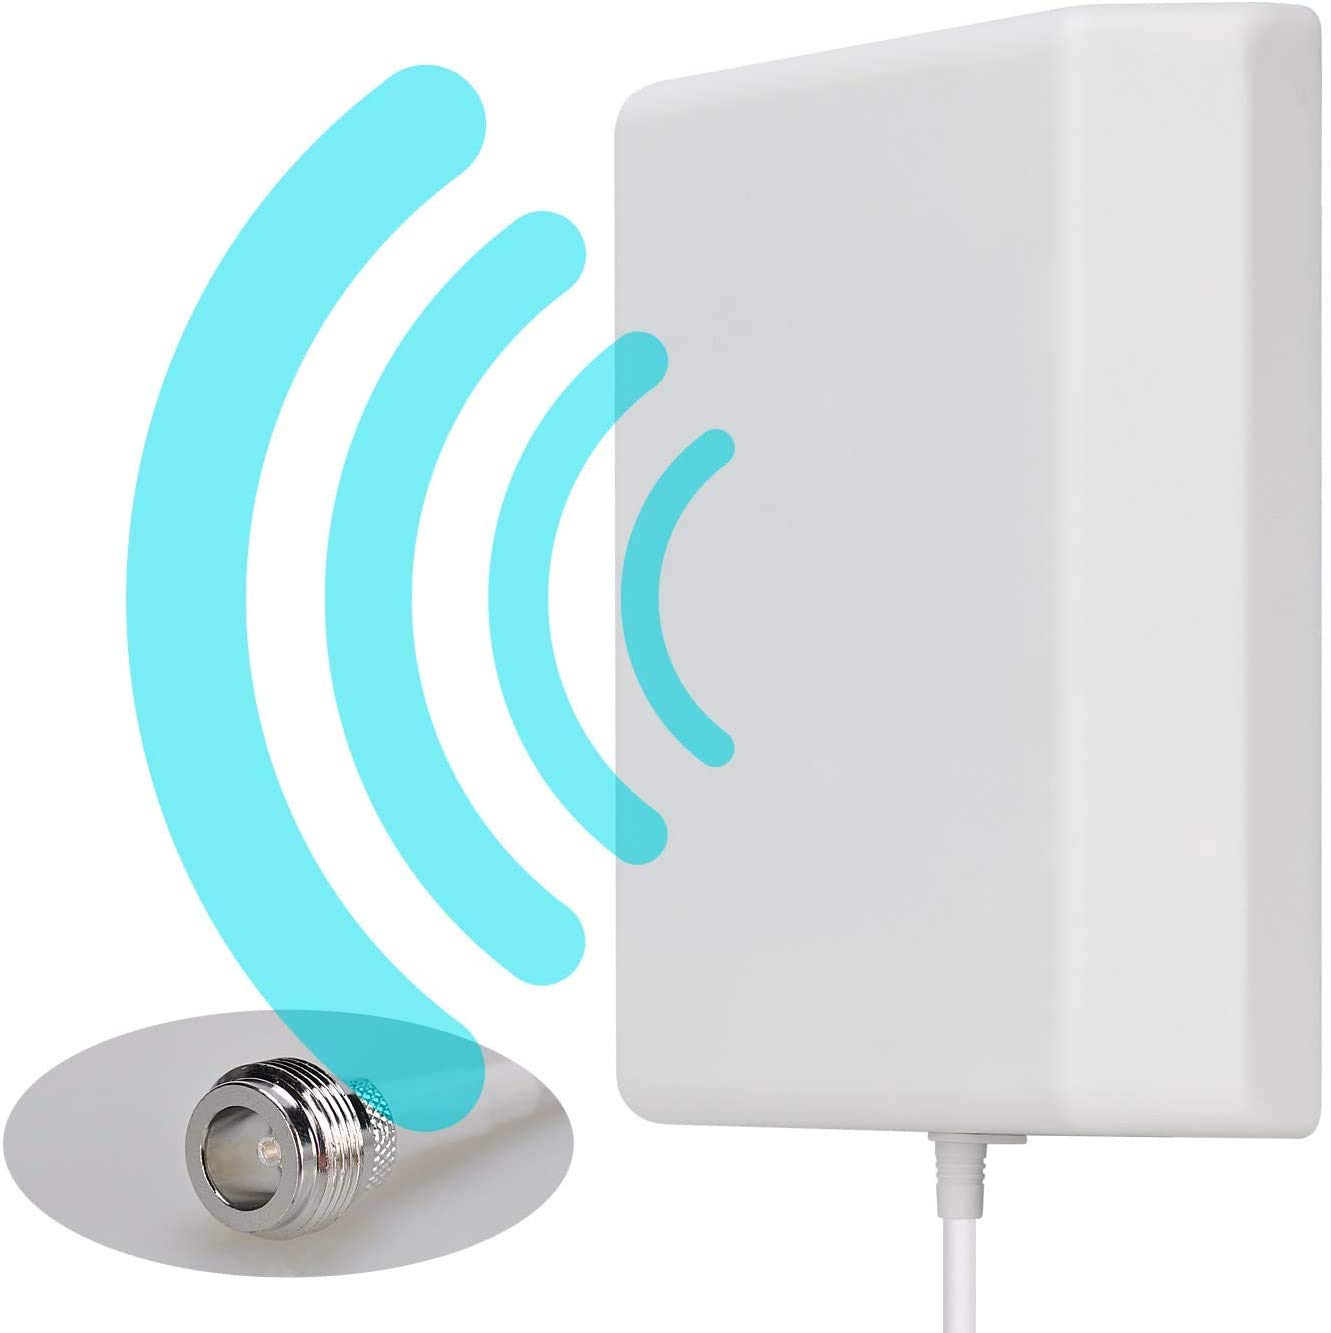 23% OFF - 3AN Telecom – Wall Mount Directional Panel Antenna for Mobile Signal Booster